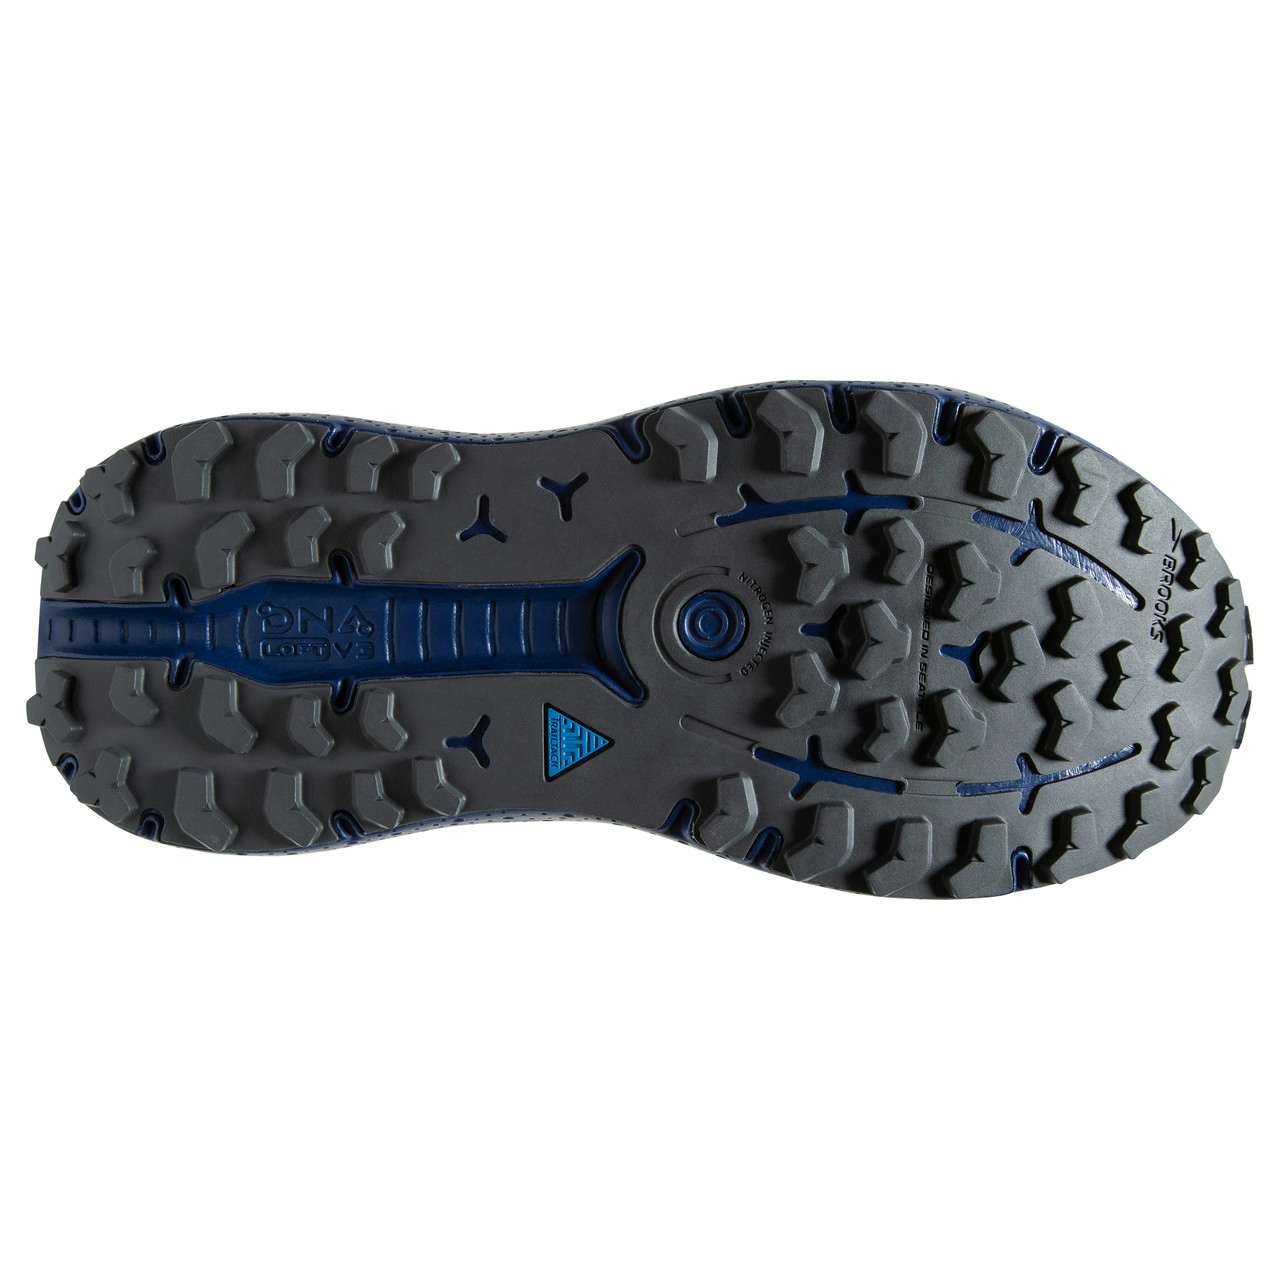 Caldera 6 Trail Running Shoes Oyster/Blue Depths/Pearl